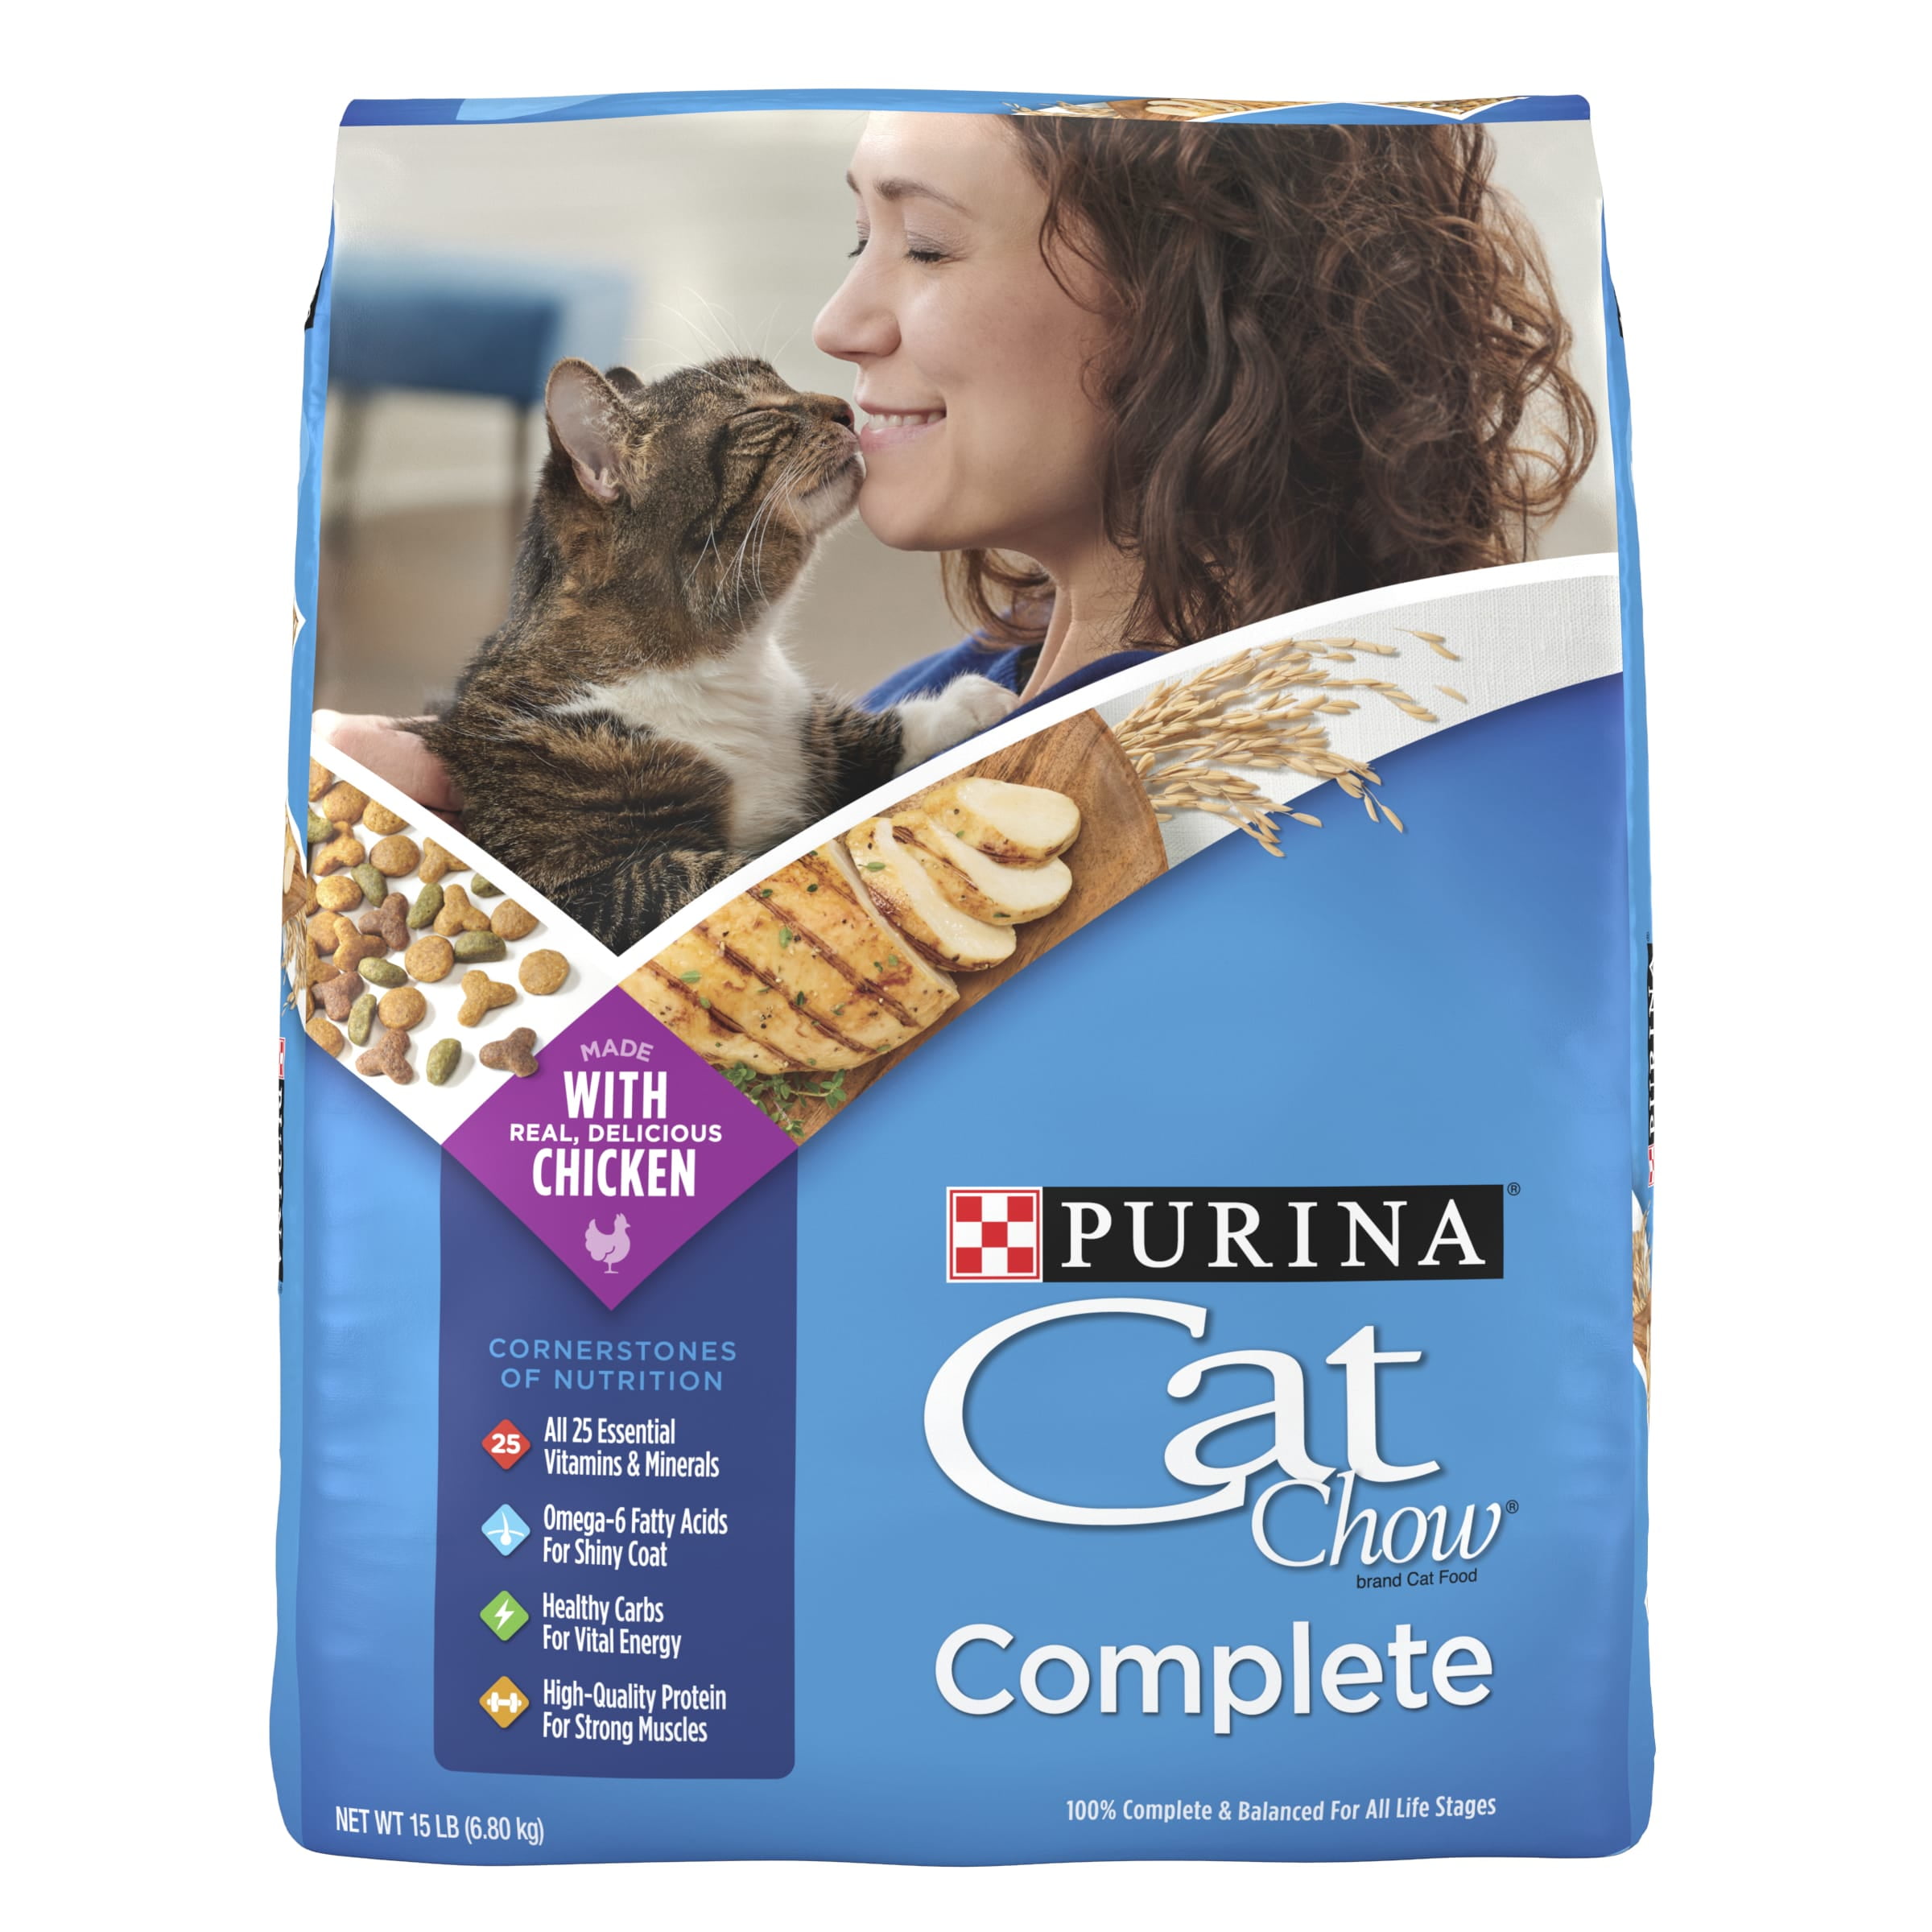 Purina Cat Chow Complete Dry Cat Food, 20 lb photo